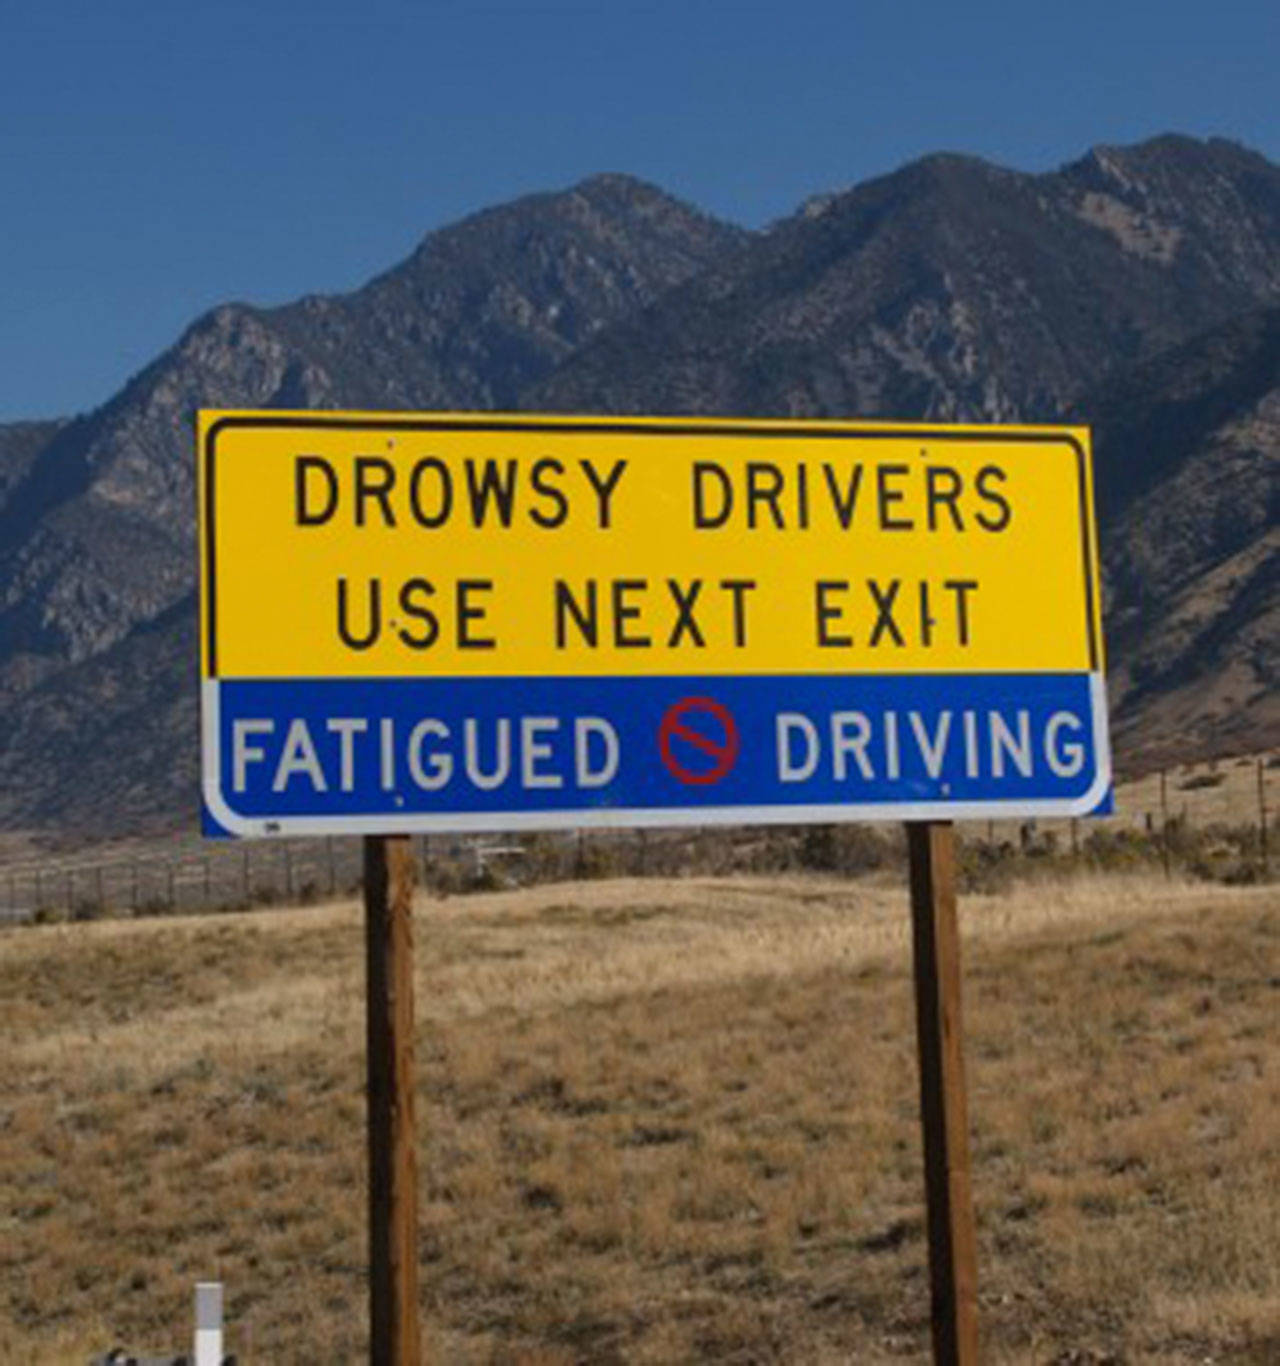 Drowsy driving awareness and prevention week